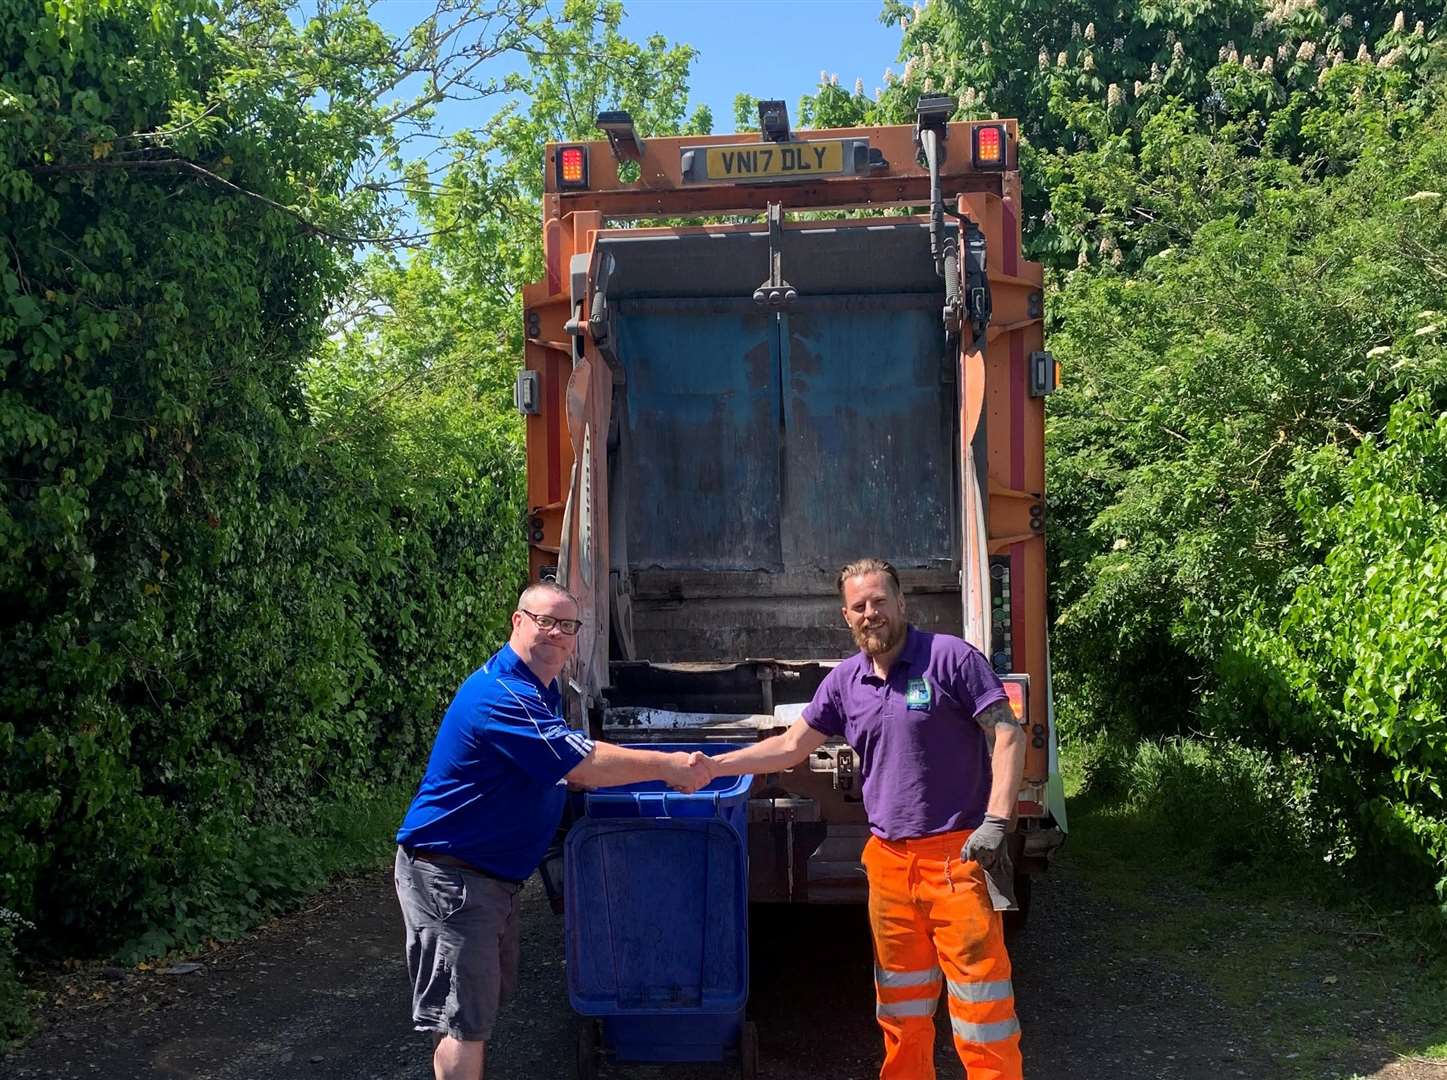 Cllr Mark Tucker with a CDDL Recycling crew member after the collections in Minster. Picture: Cllr Mark Tucker